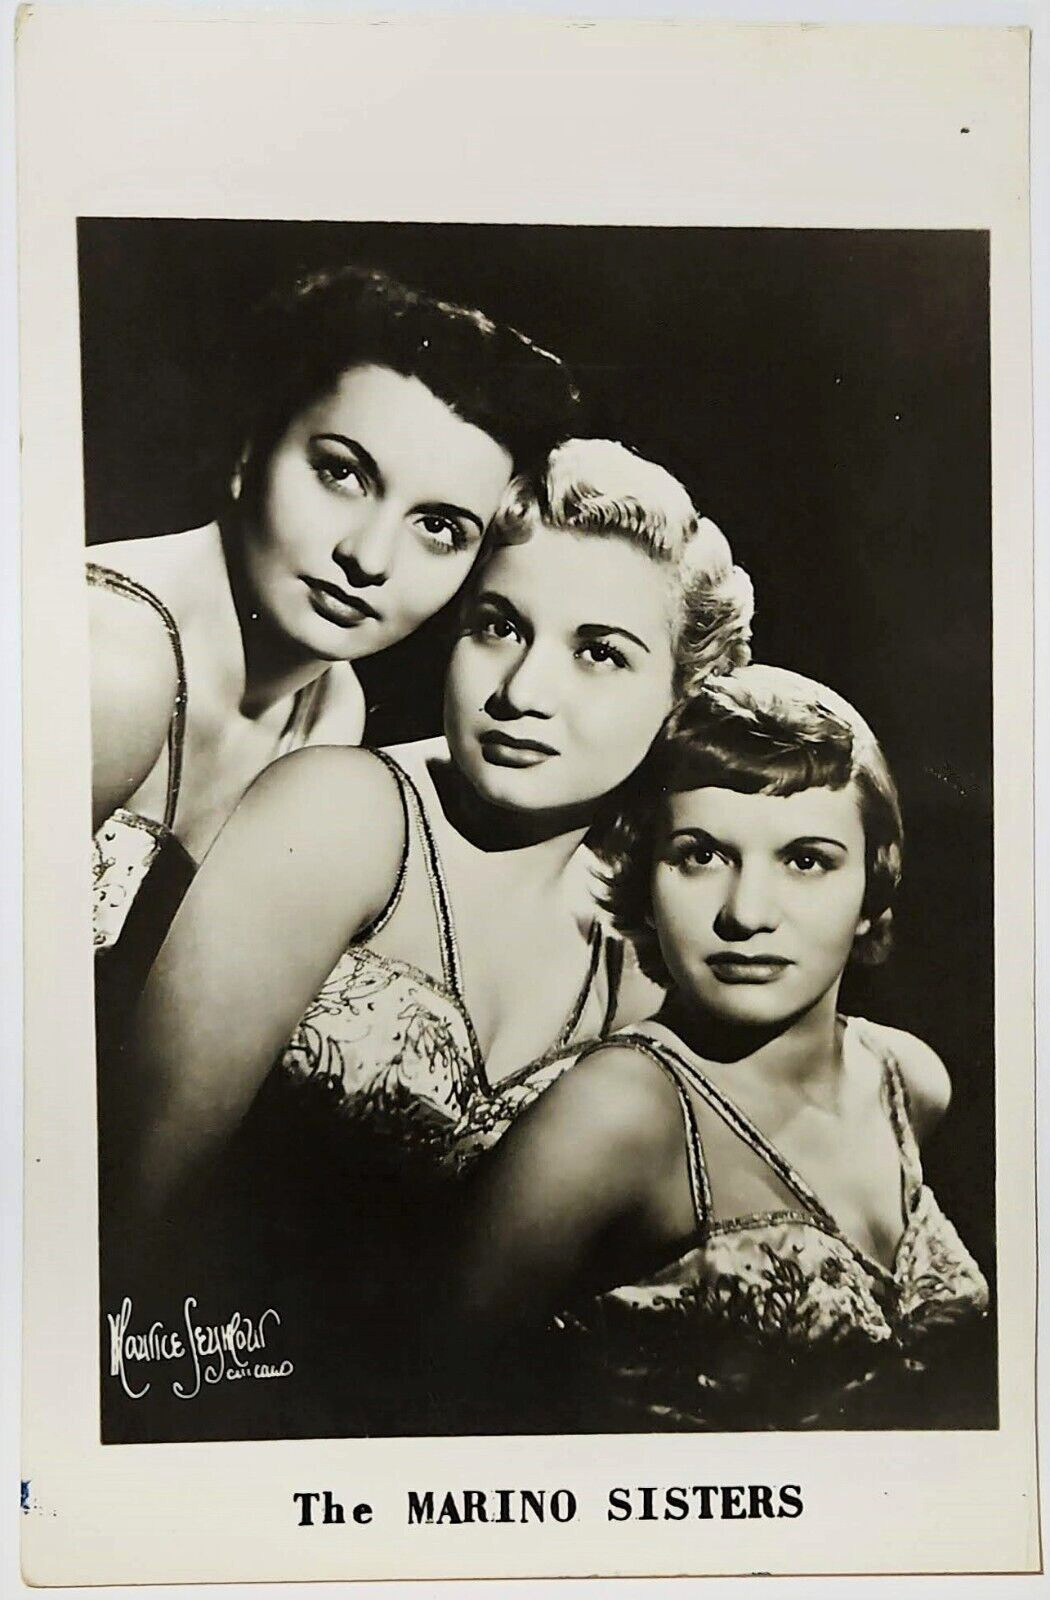 Maurice Seymour Real Photo: Show Business, Dancers, The Marino Sisters, 1940s.